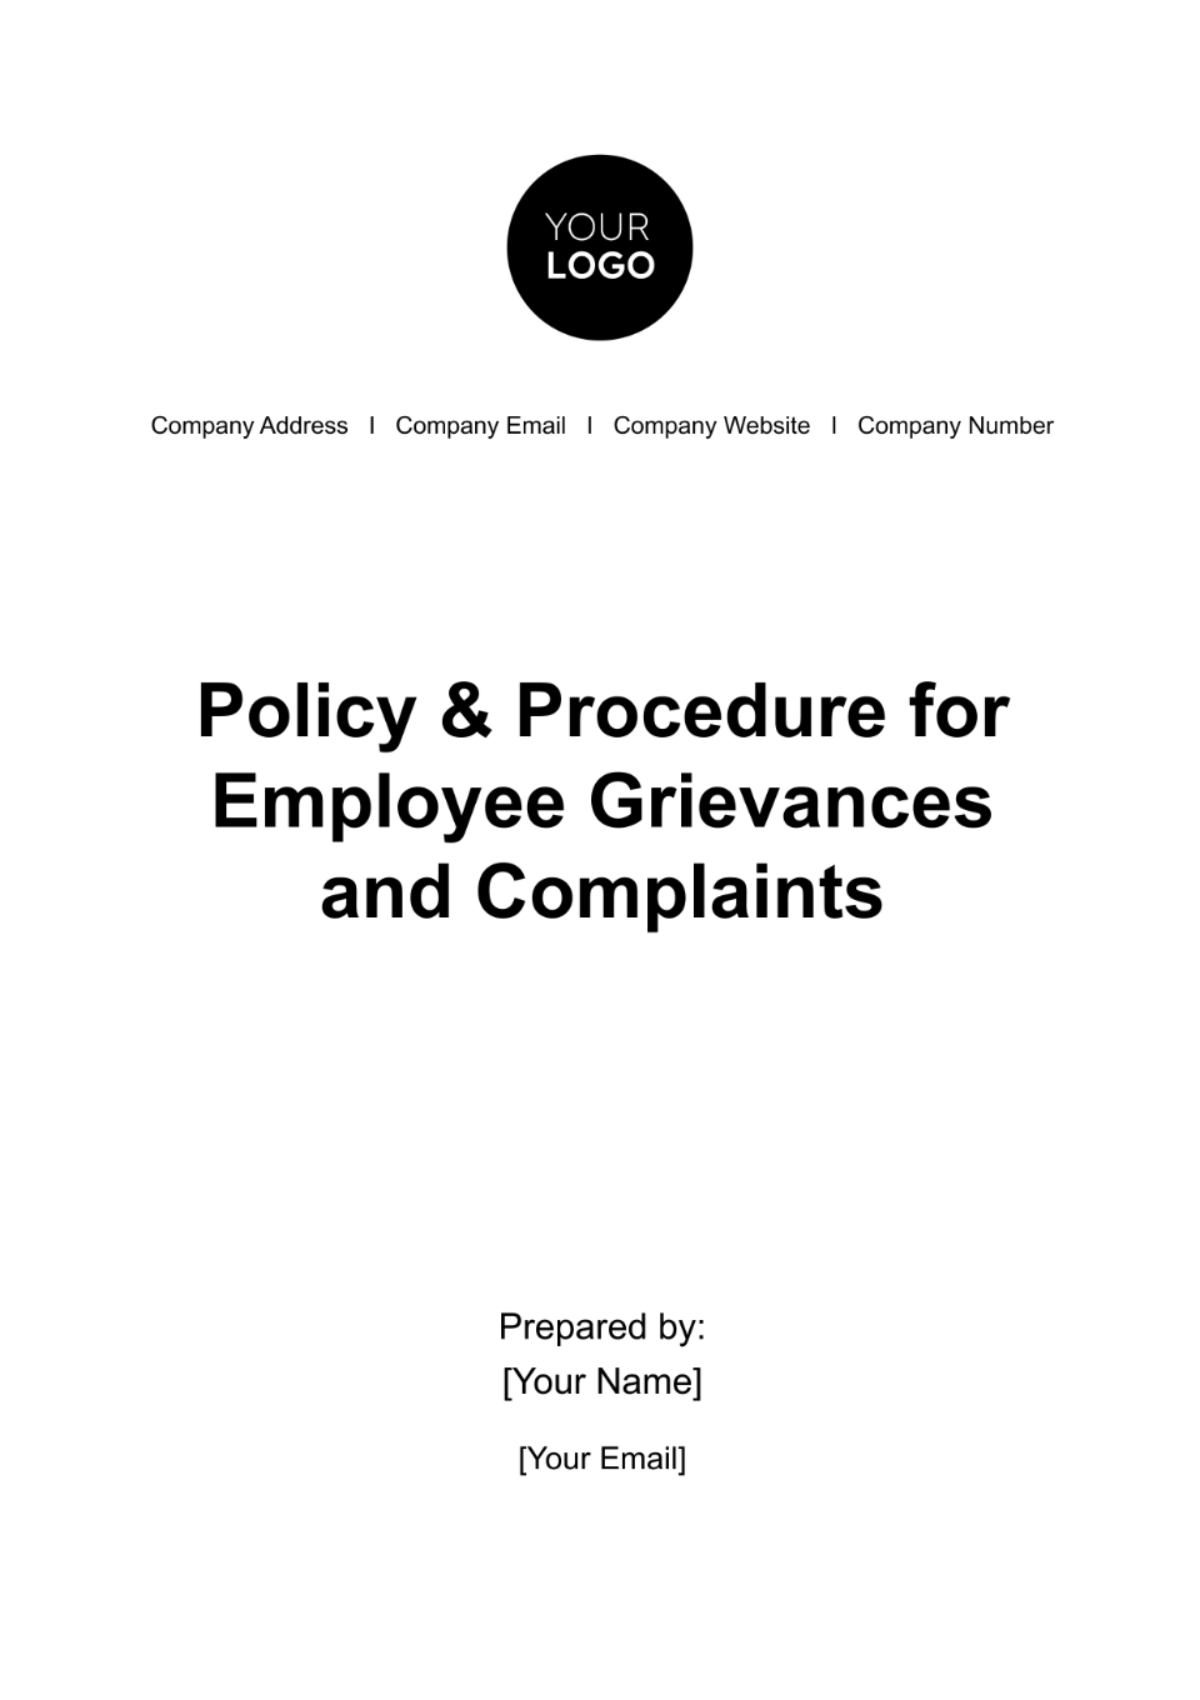 Free Policy & Procedure for Employee Grievances and Complaints HR Template